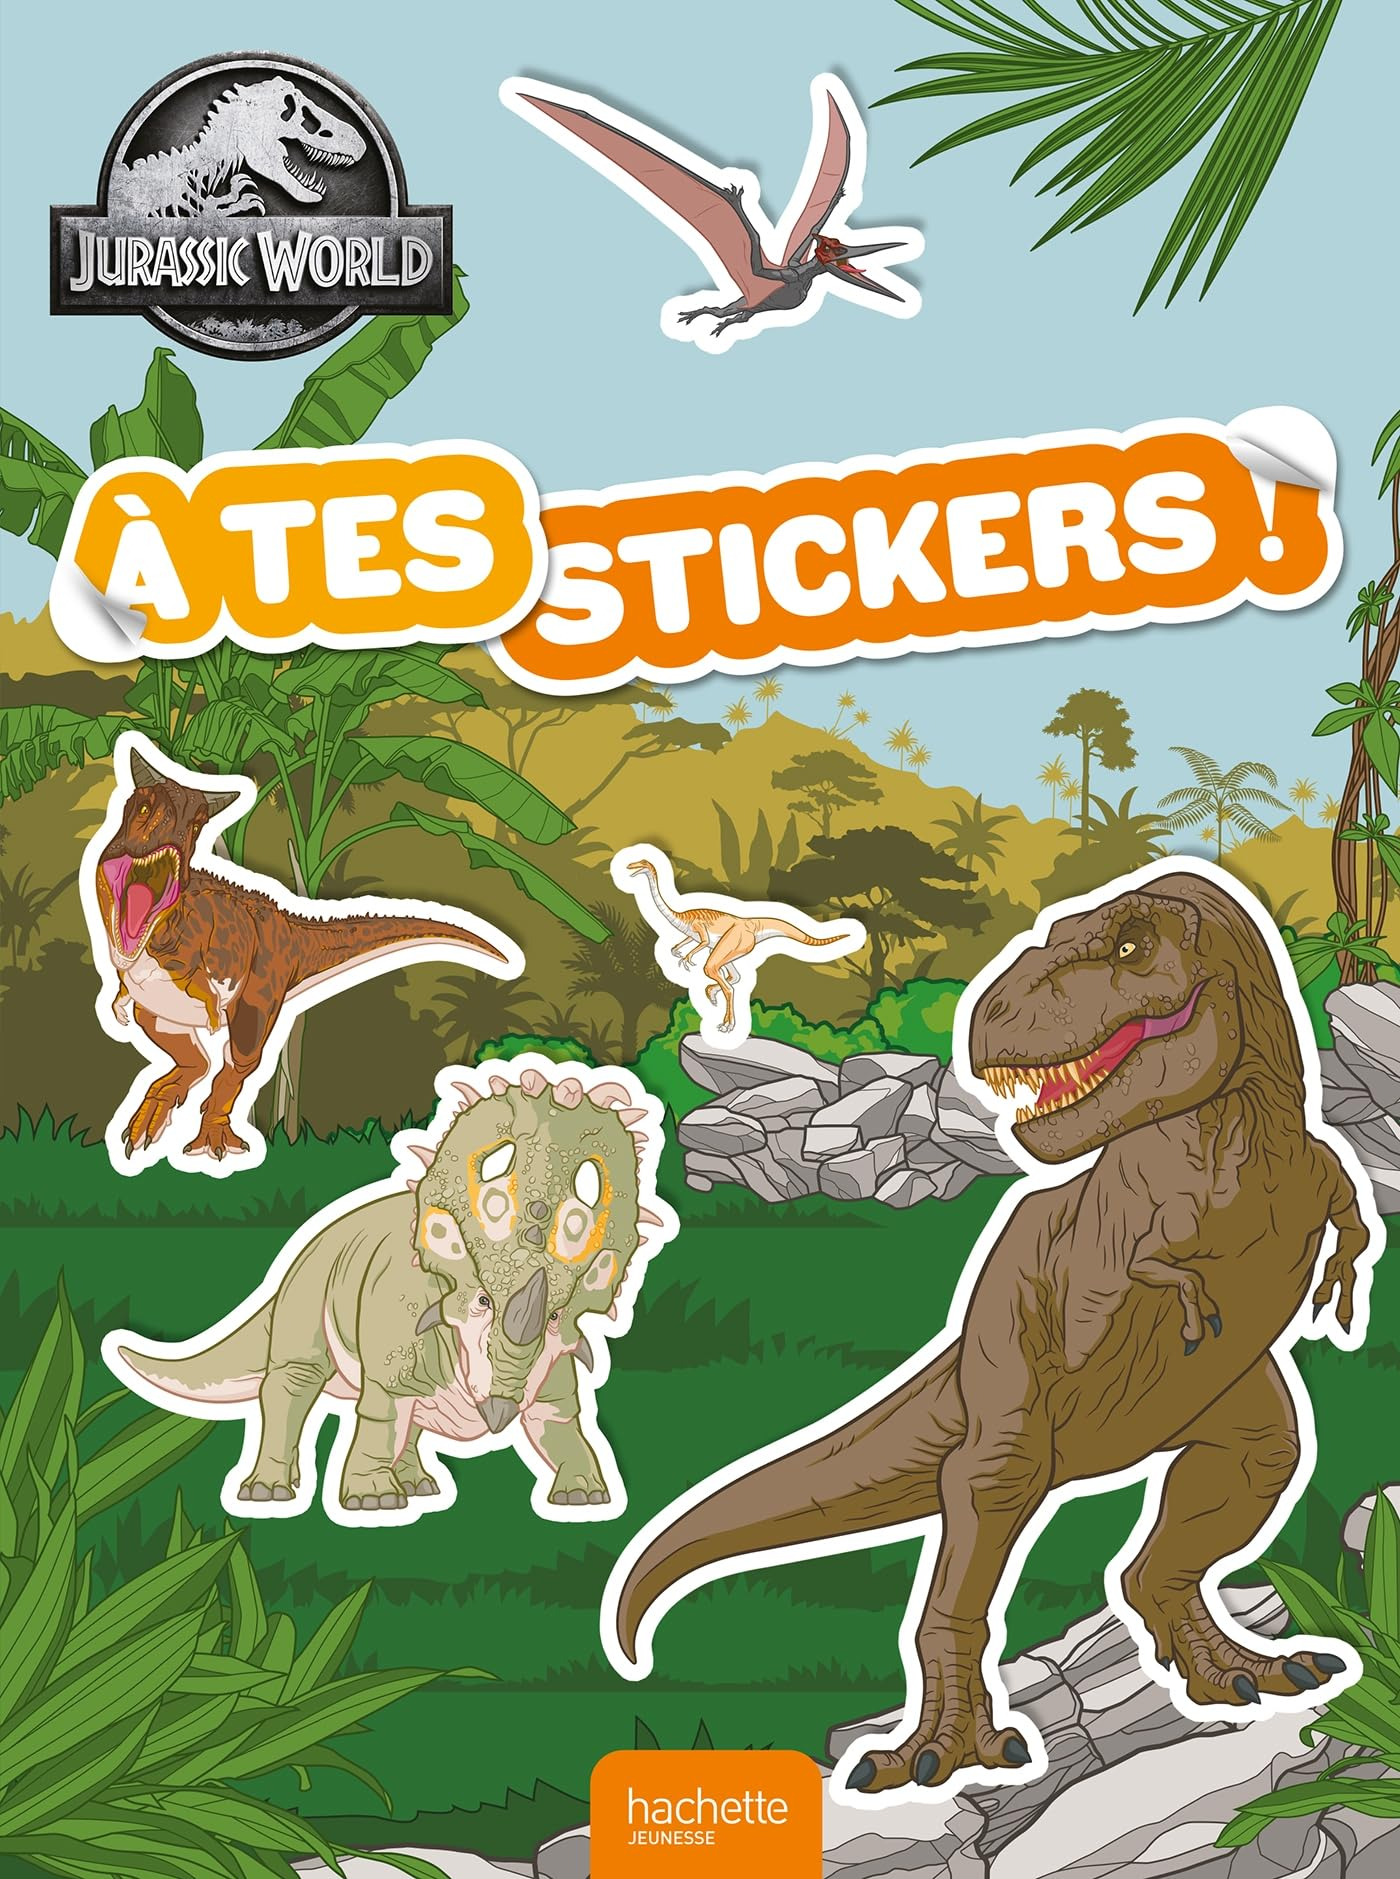 Jurassic World : A tes stickers ! : A tes stickers ! NEW